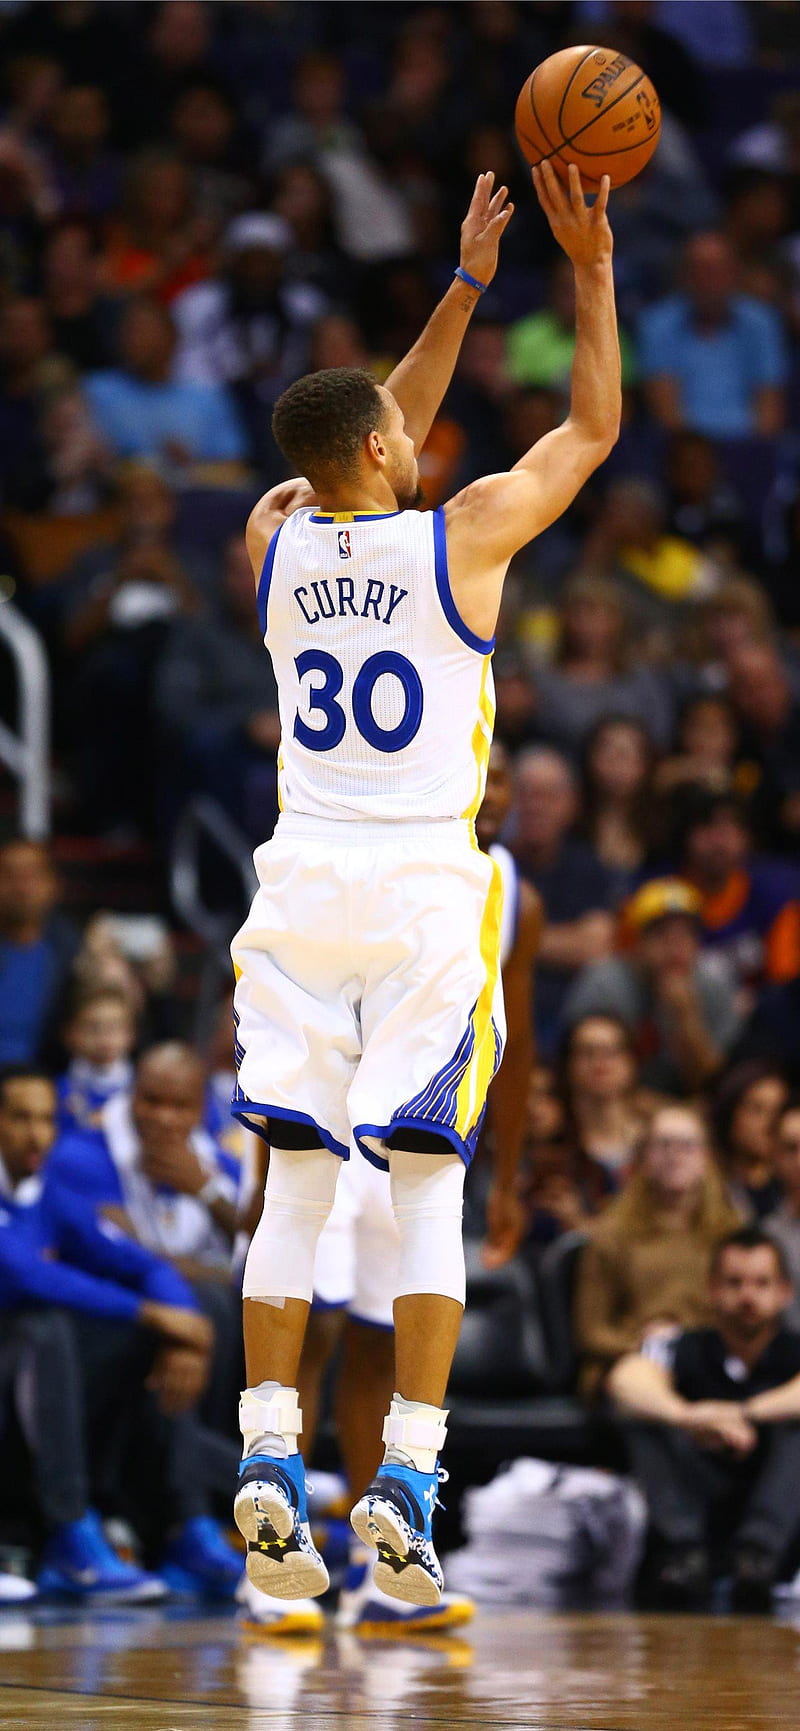 Stephen curry shooting HD wallpapers